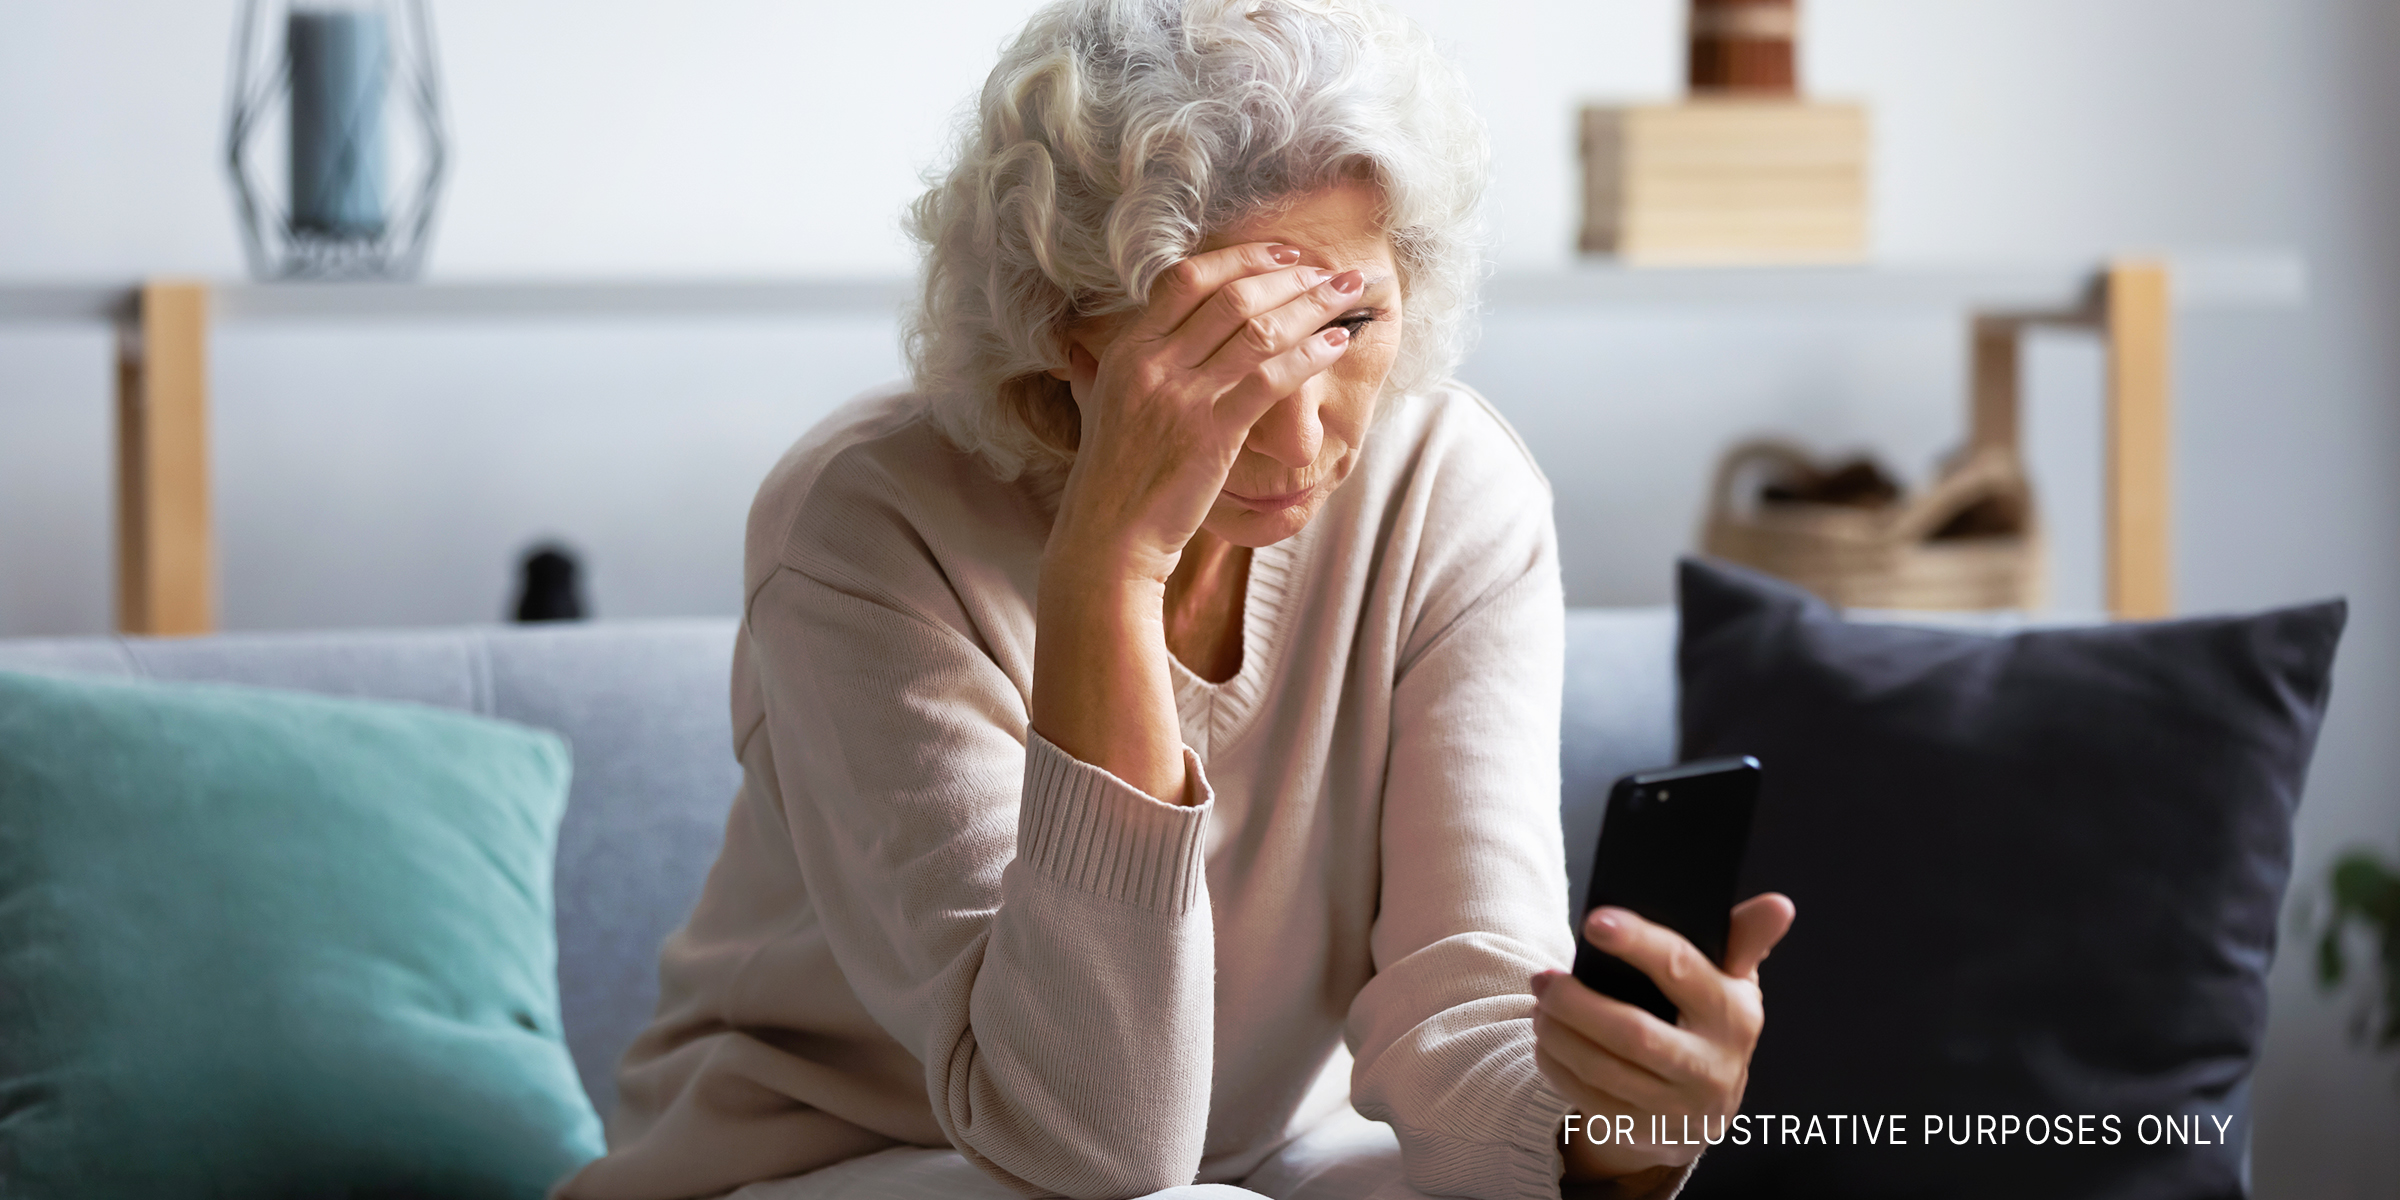 An unhappy senior woman looking at her phone screen | Source: Shutterstock